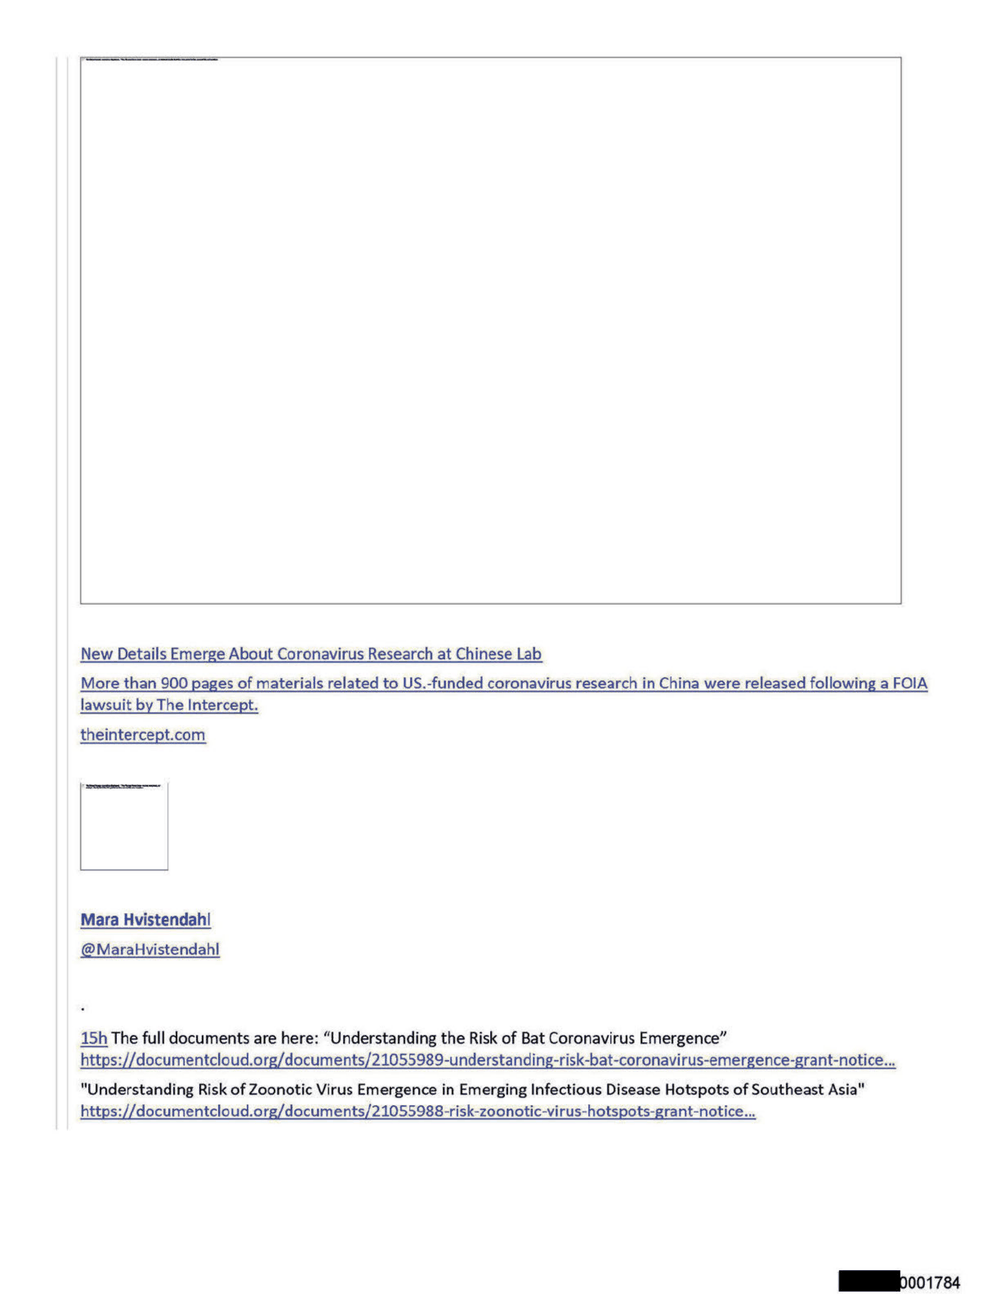 Page 11 from David Morens NIH Emails Redacted